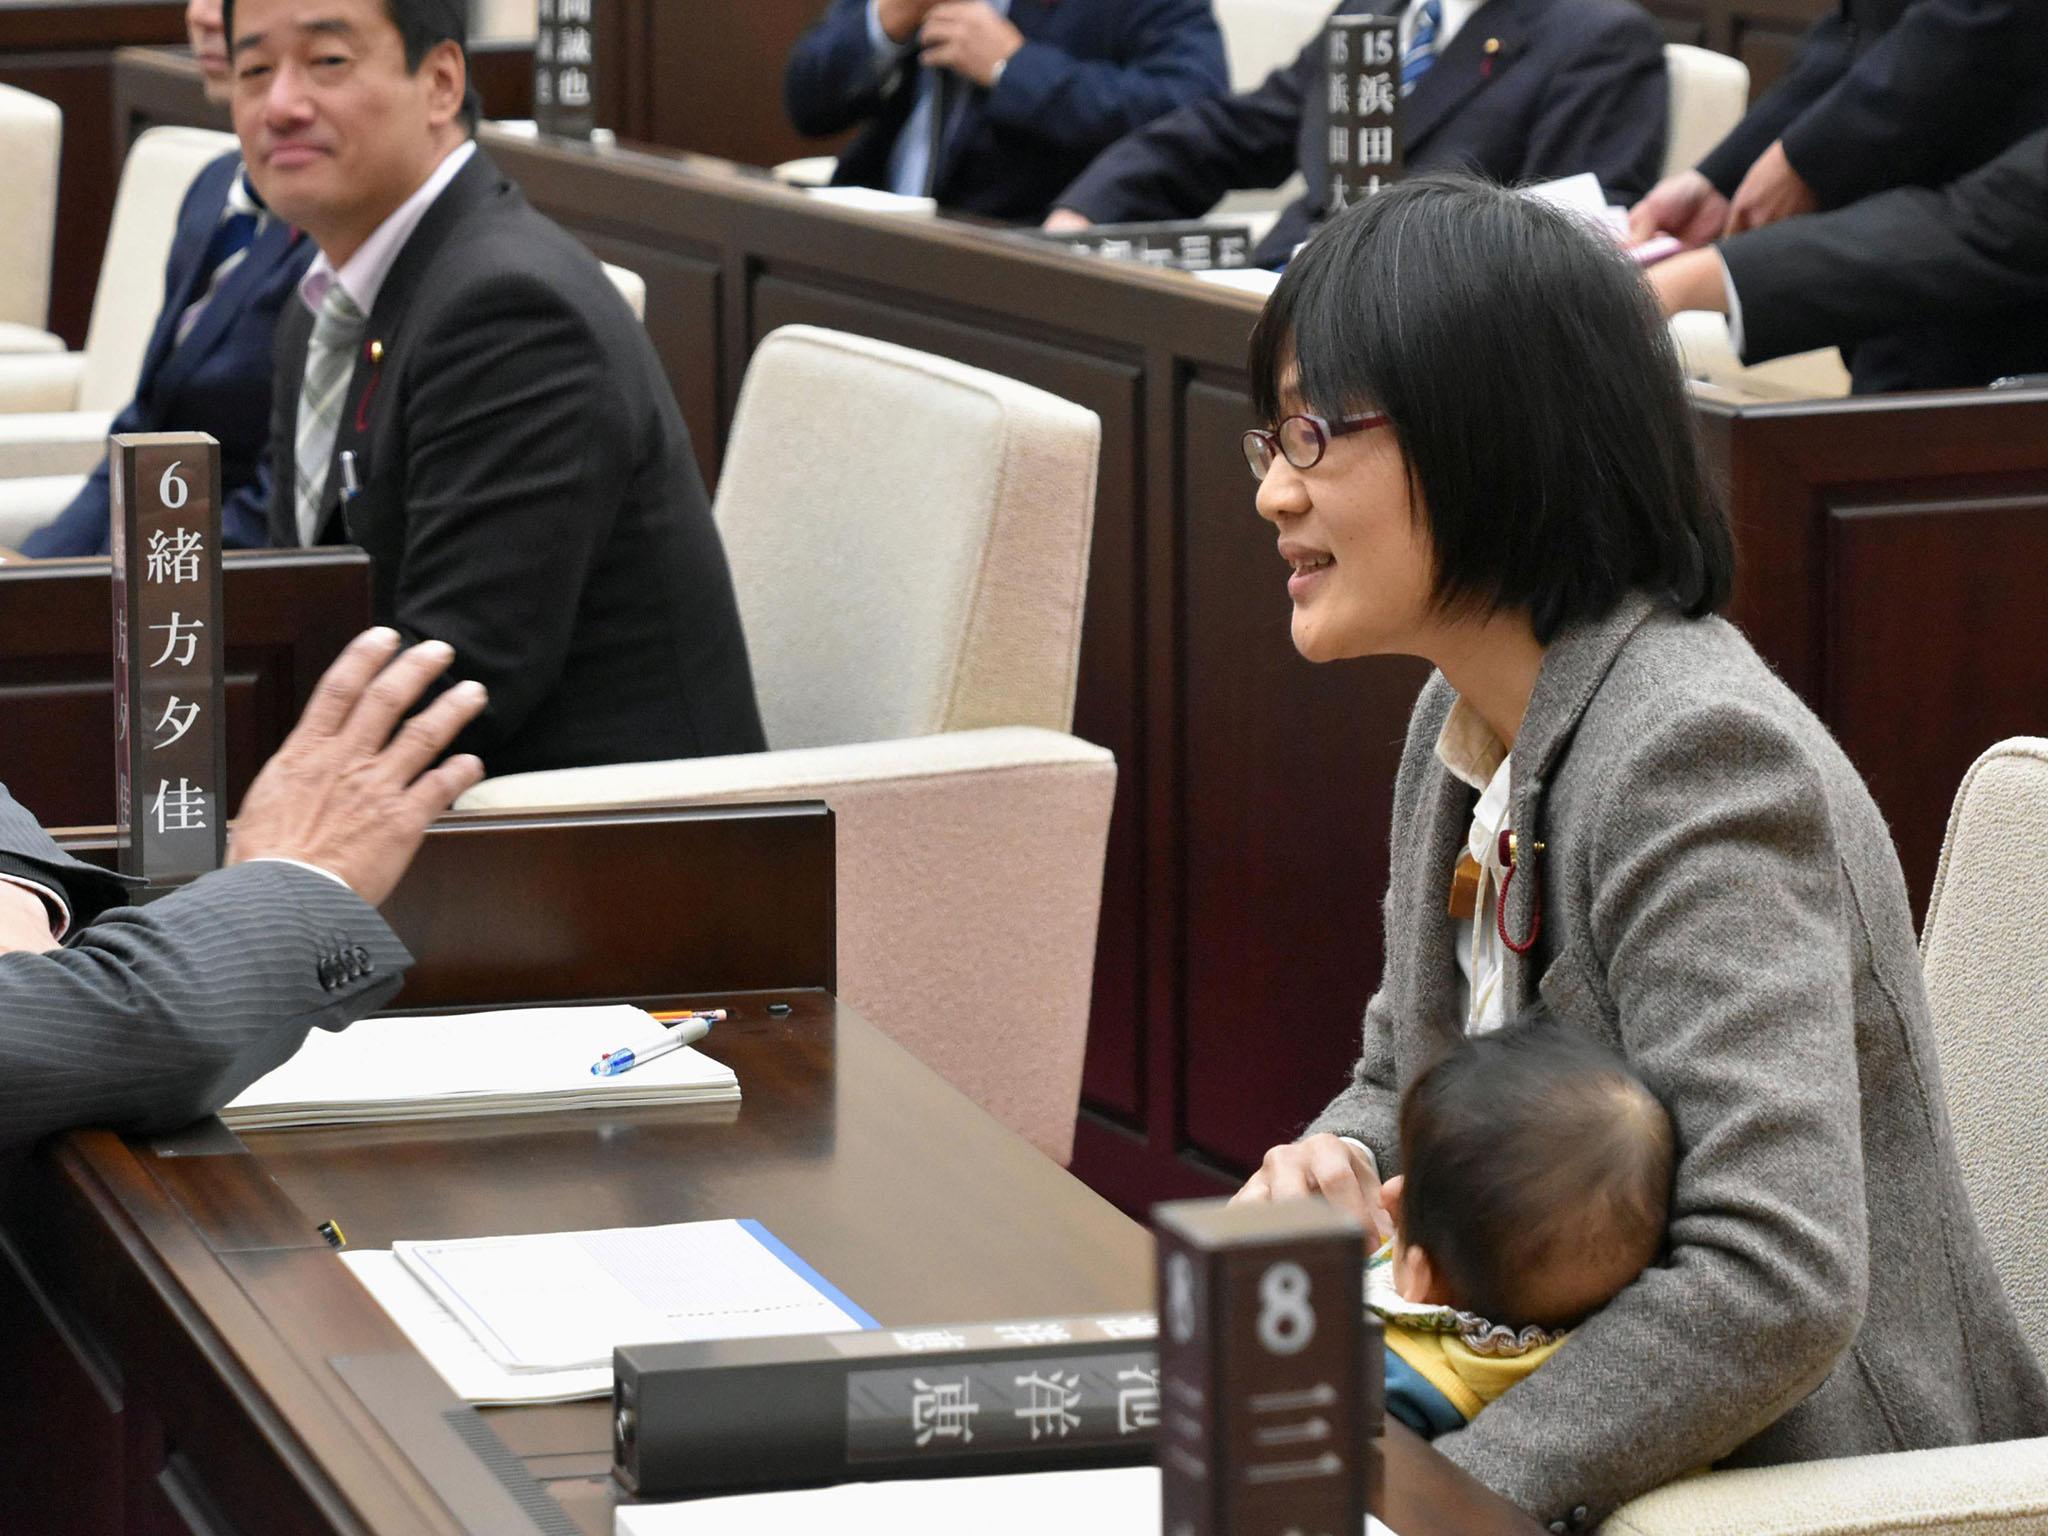 City assembly member Yuka Ogata was told to remove her seven-month-old baby during a session in Kumamoto